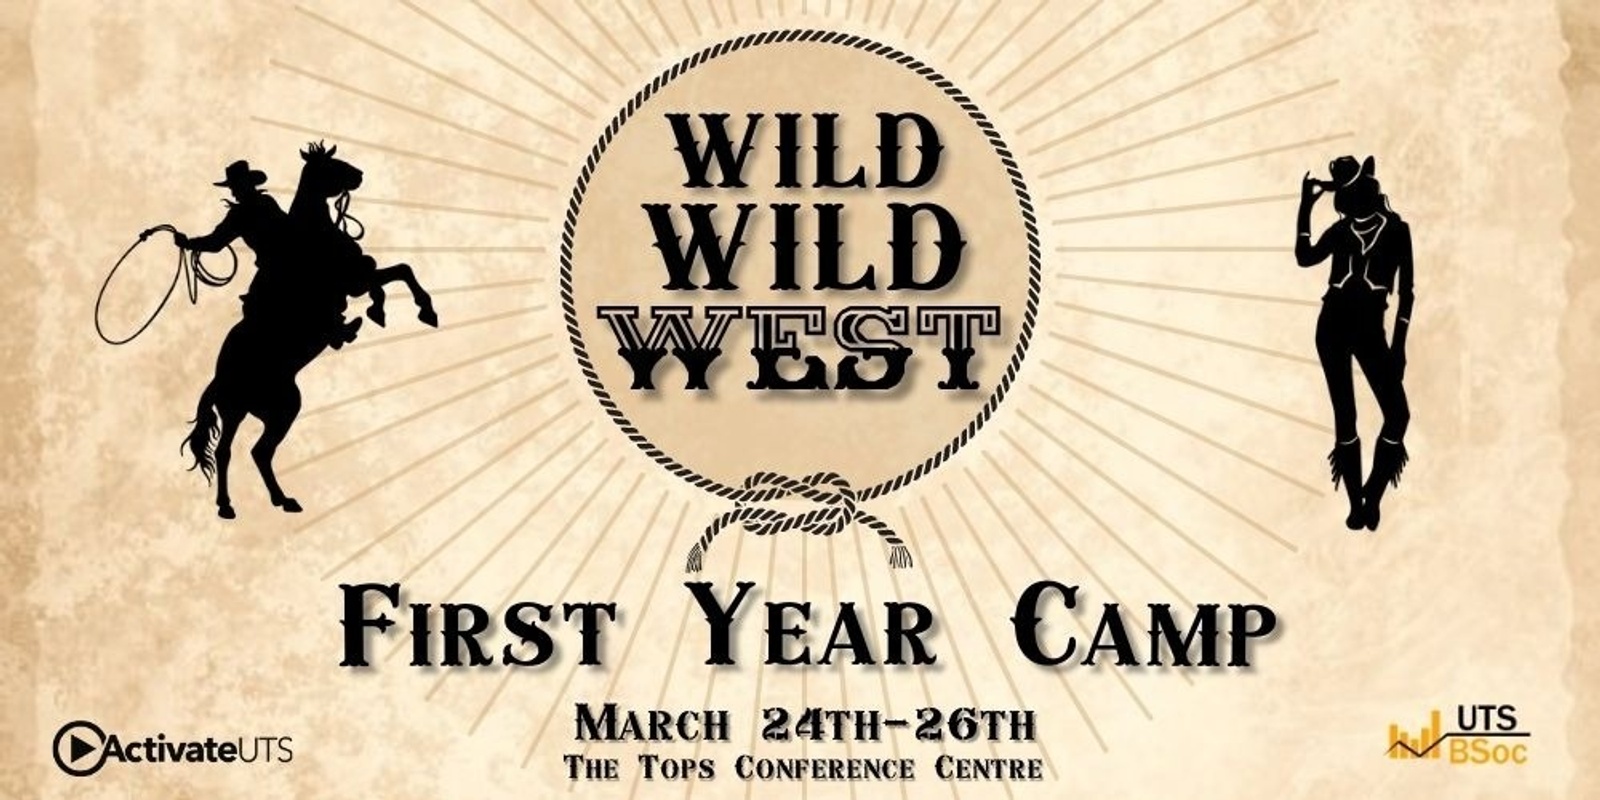 Banner image for BSoc First Year Camp 2023 - Wild Wild West